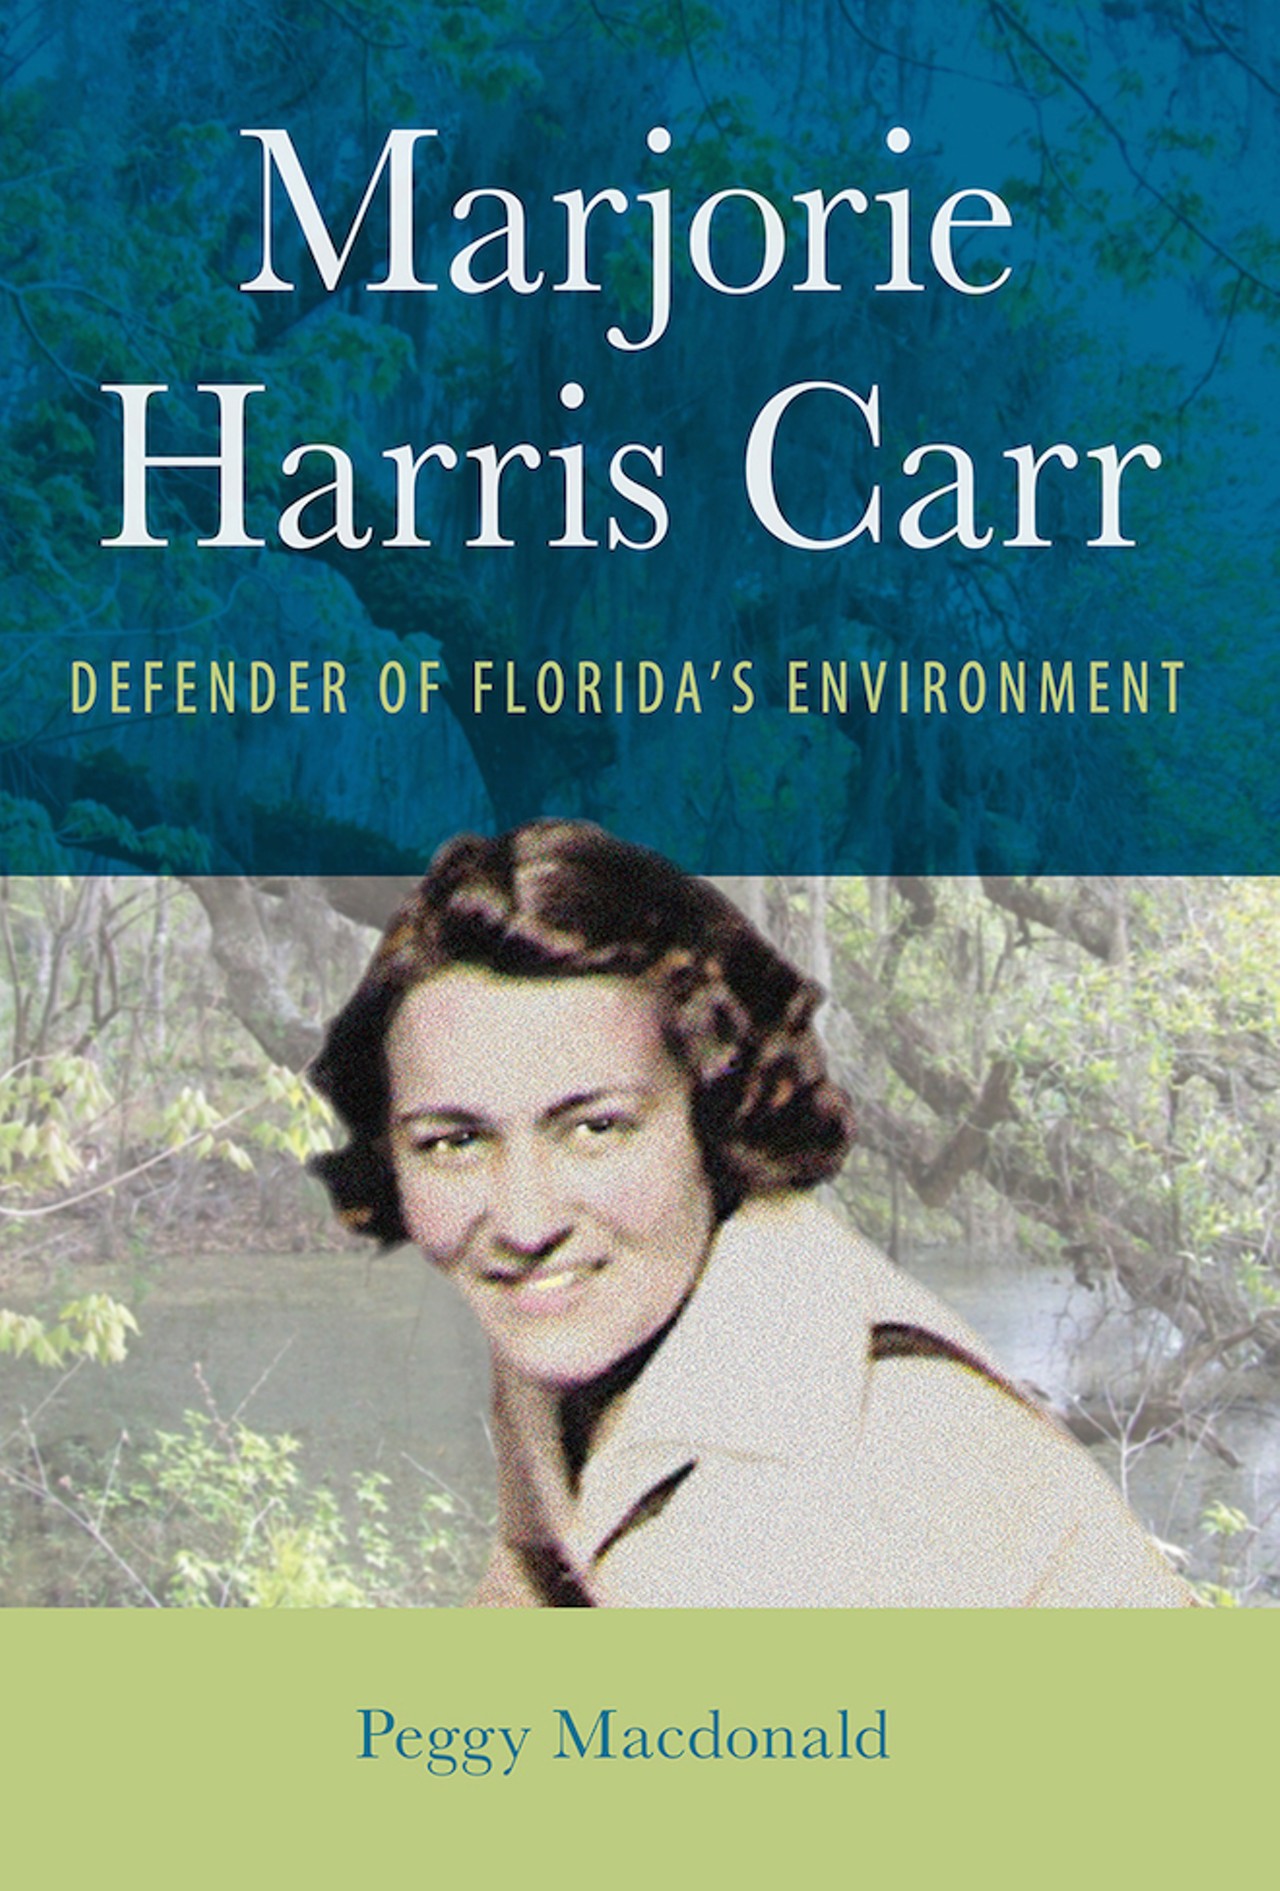 Wednesday, Nov. 26Marjorie Harris Carr: Defenders of Florida&#146;s Environment Peggy MacDonald reads from her book about Carr as the featured speaker at this meeting of the Sierra Club of Central Florida6:45-8:45 p.m.; Leu Gardens, 1920 N. Forest Ave.